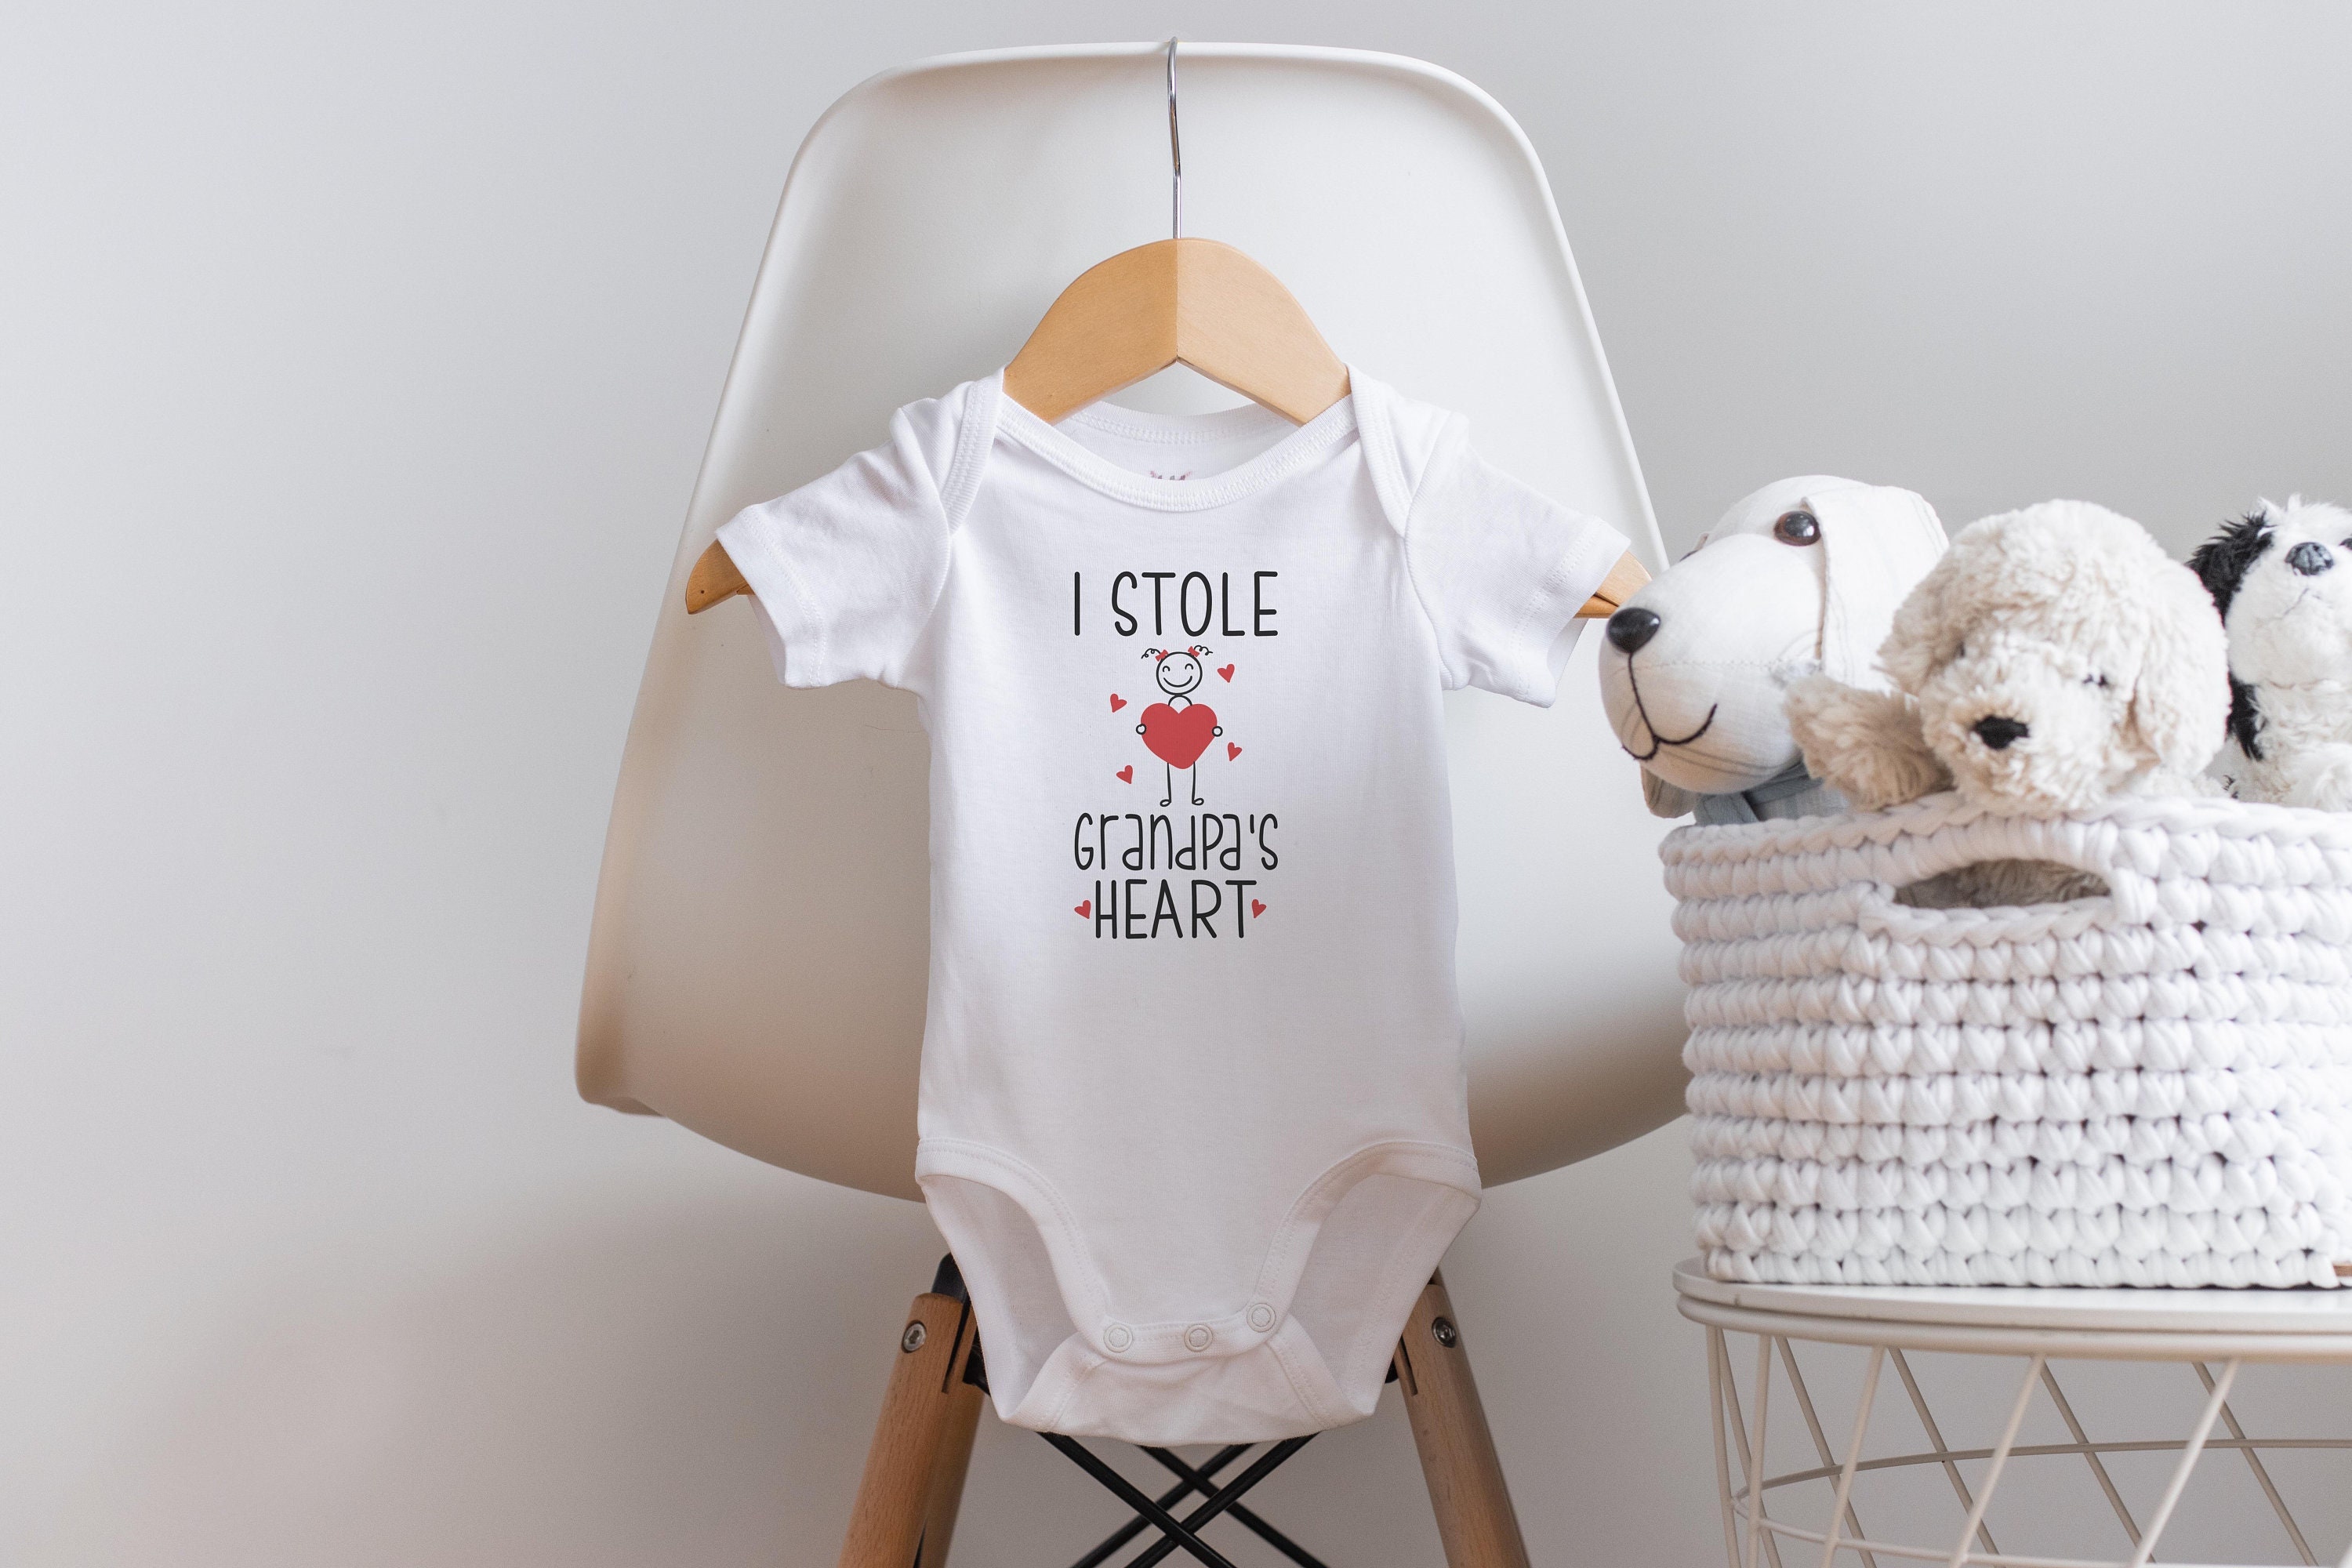 Clothing & Accessories :: Kids & Baby :: Baby Clothing